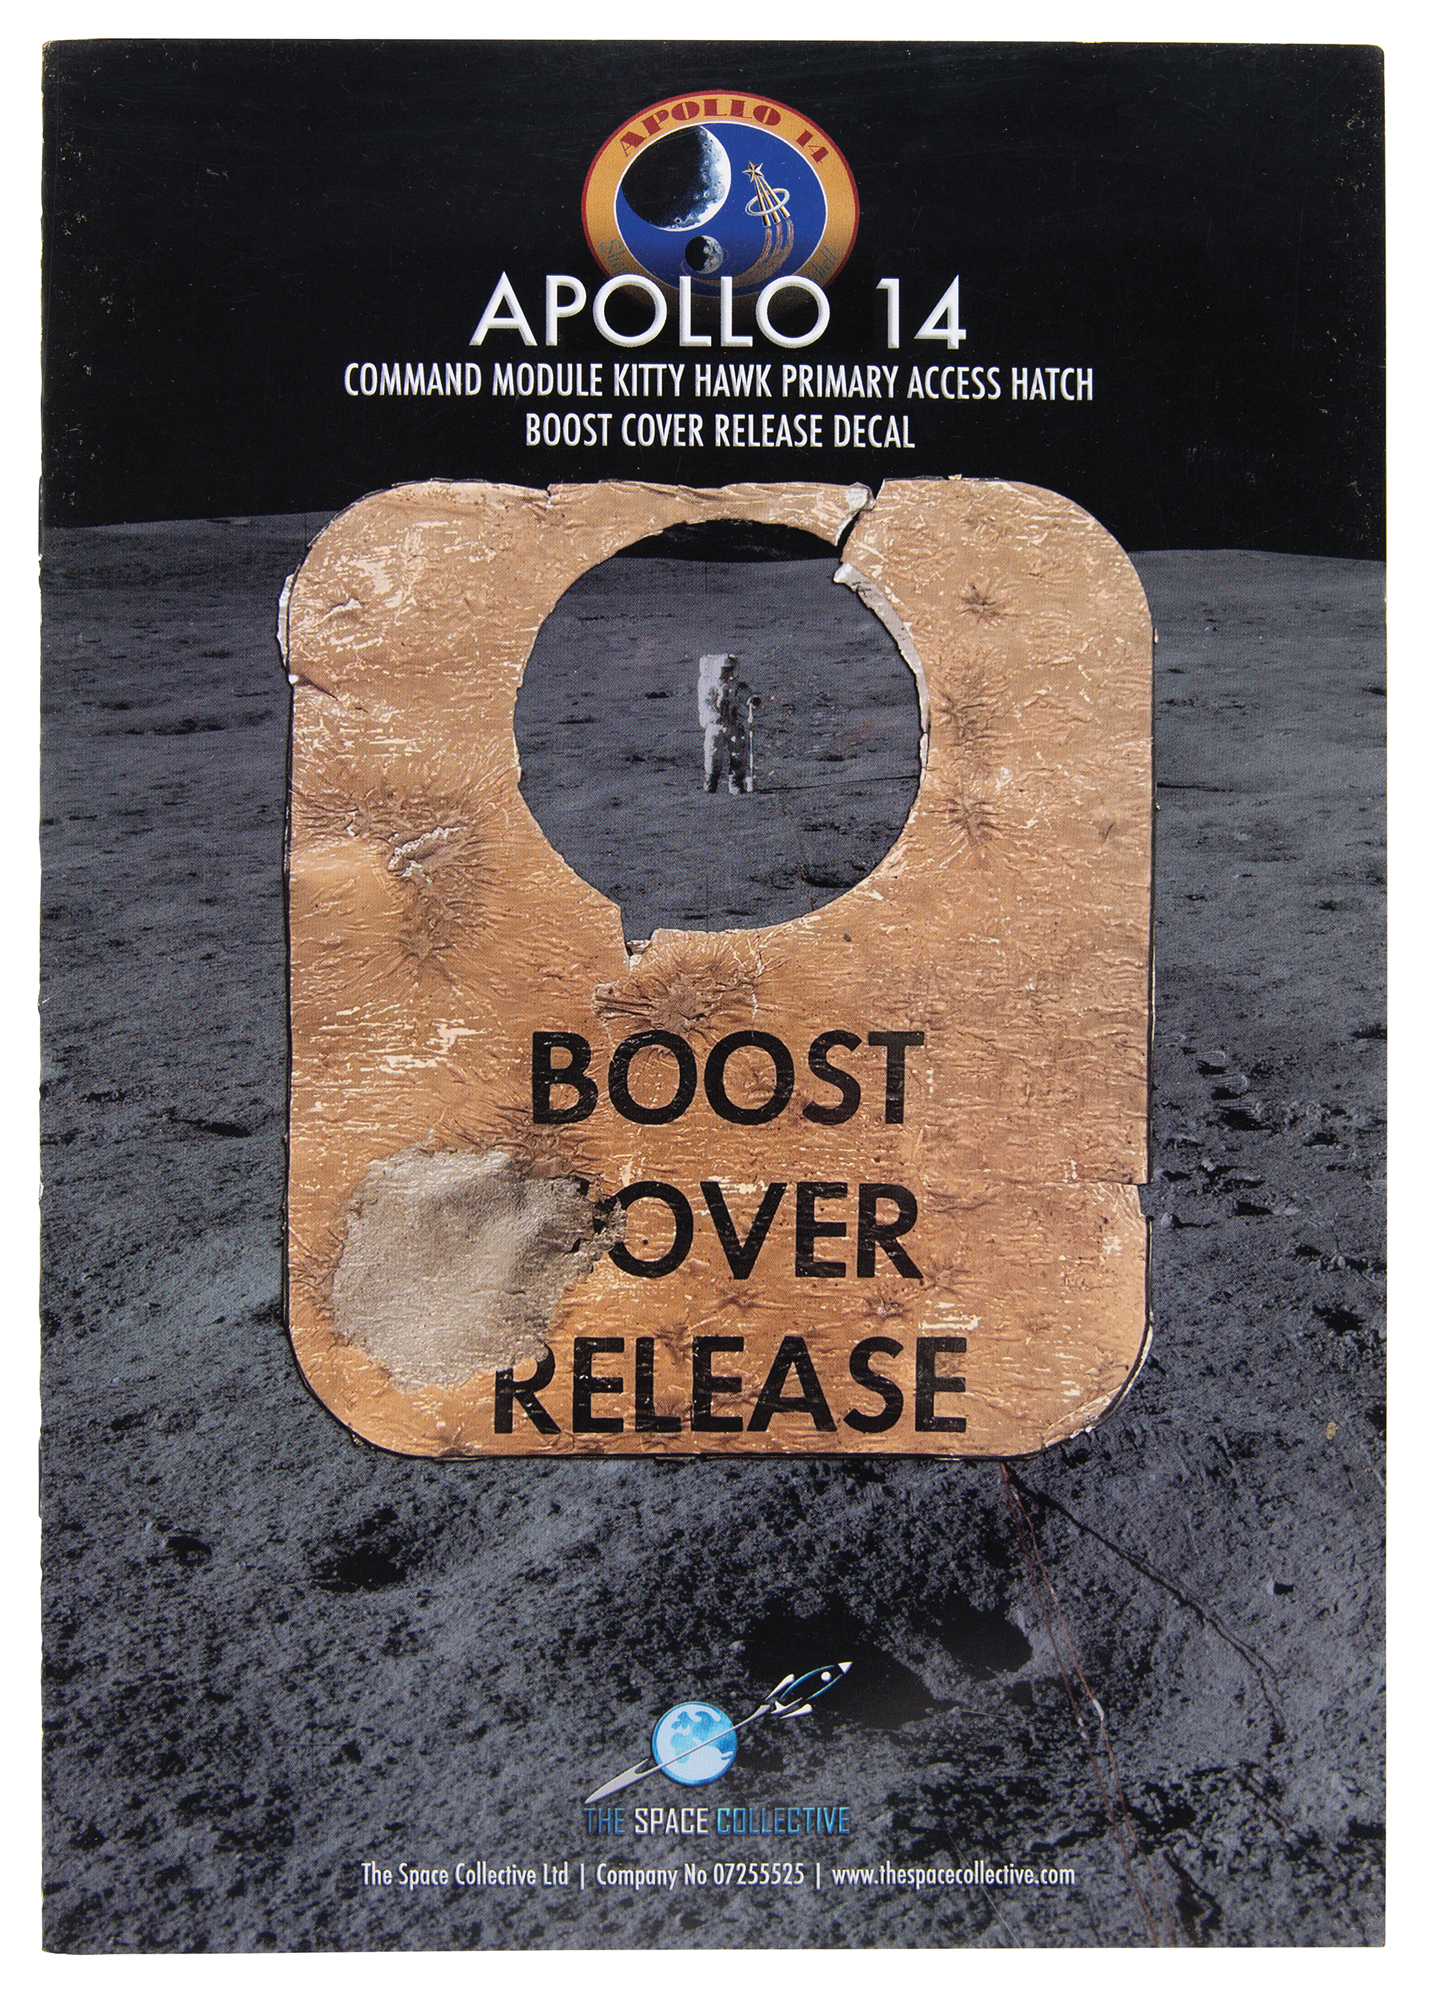 Lot #4244 Apollo 14 Flown 'Boost Cover Release' Hatch Label from the Command Module Kitty Hawk - Image 4